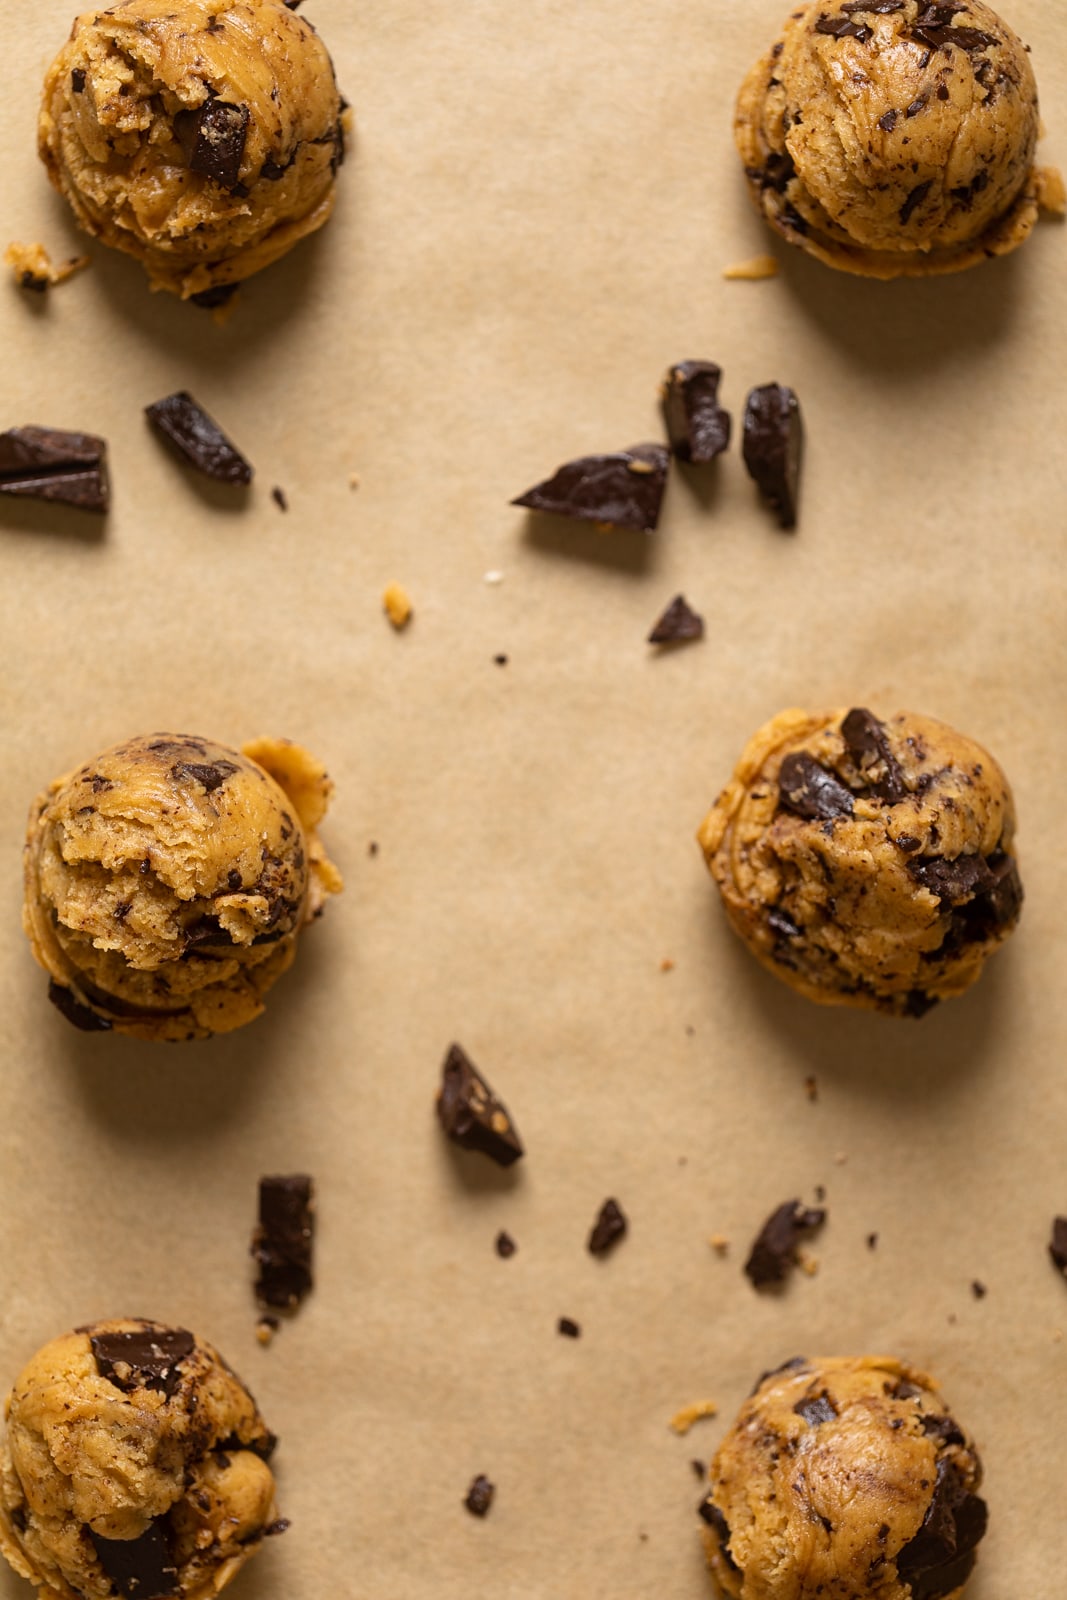 Big Brown Butter Chocolate Chip Cookie dough balls on parchment paper